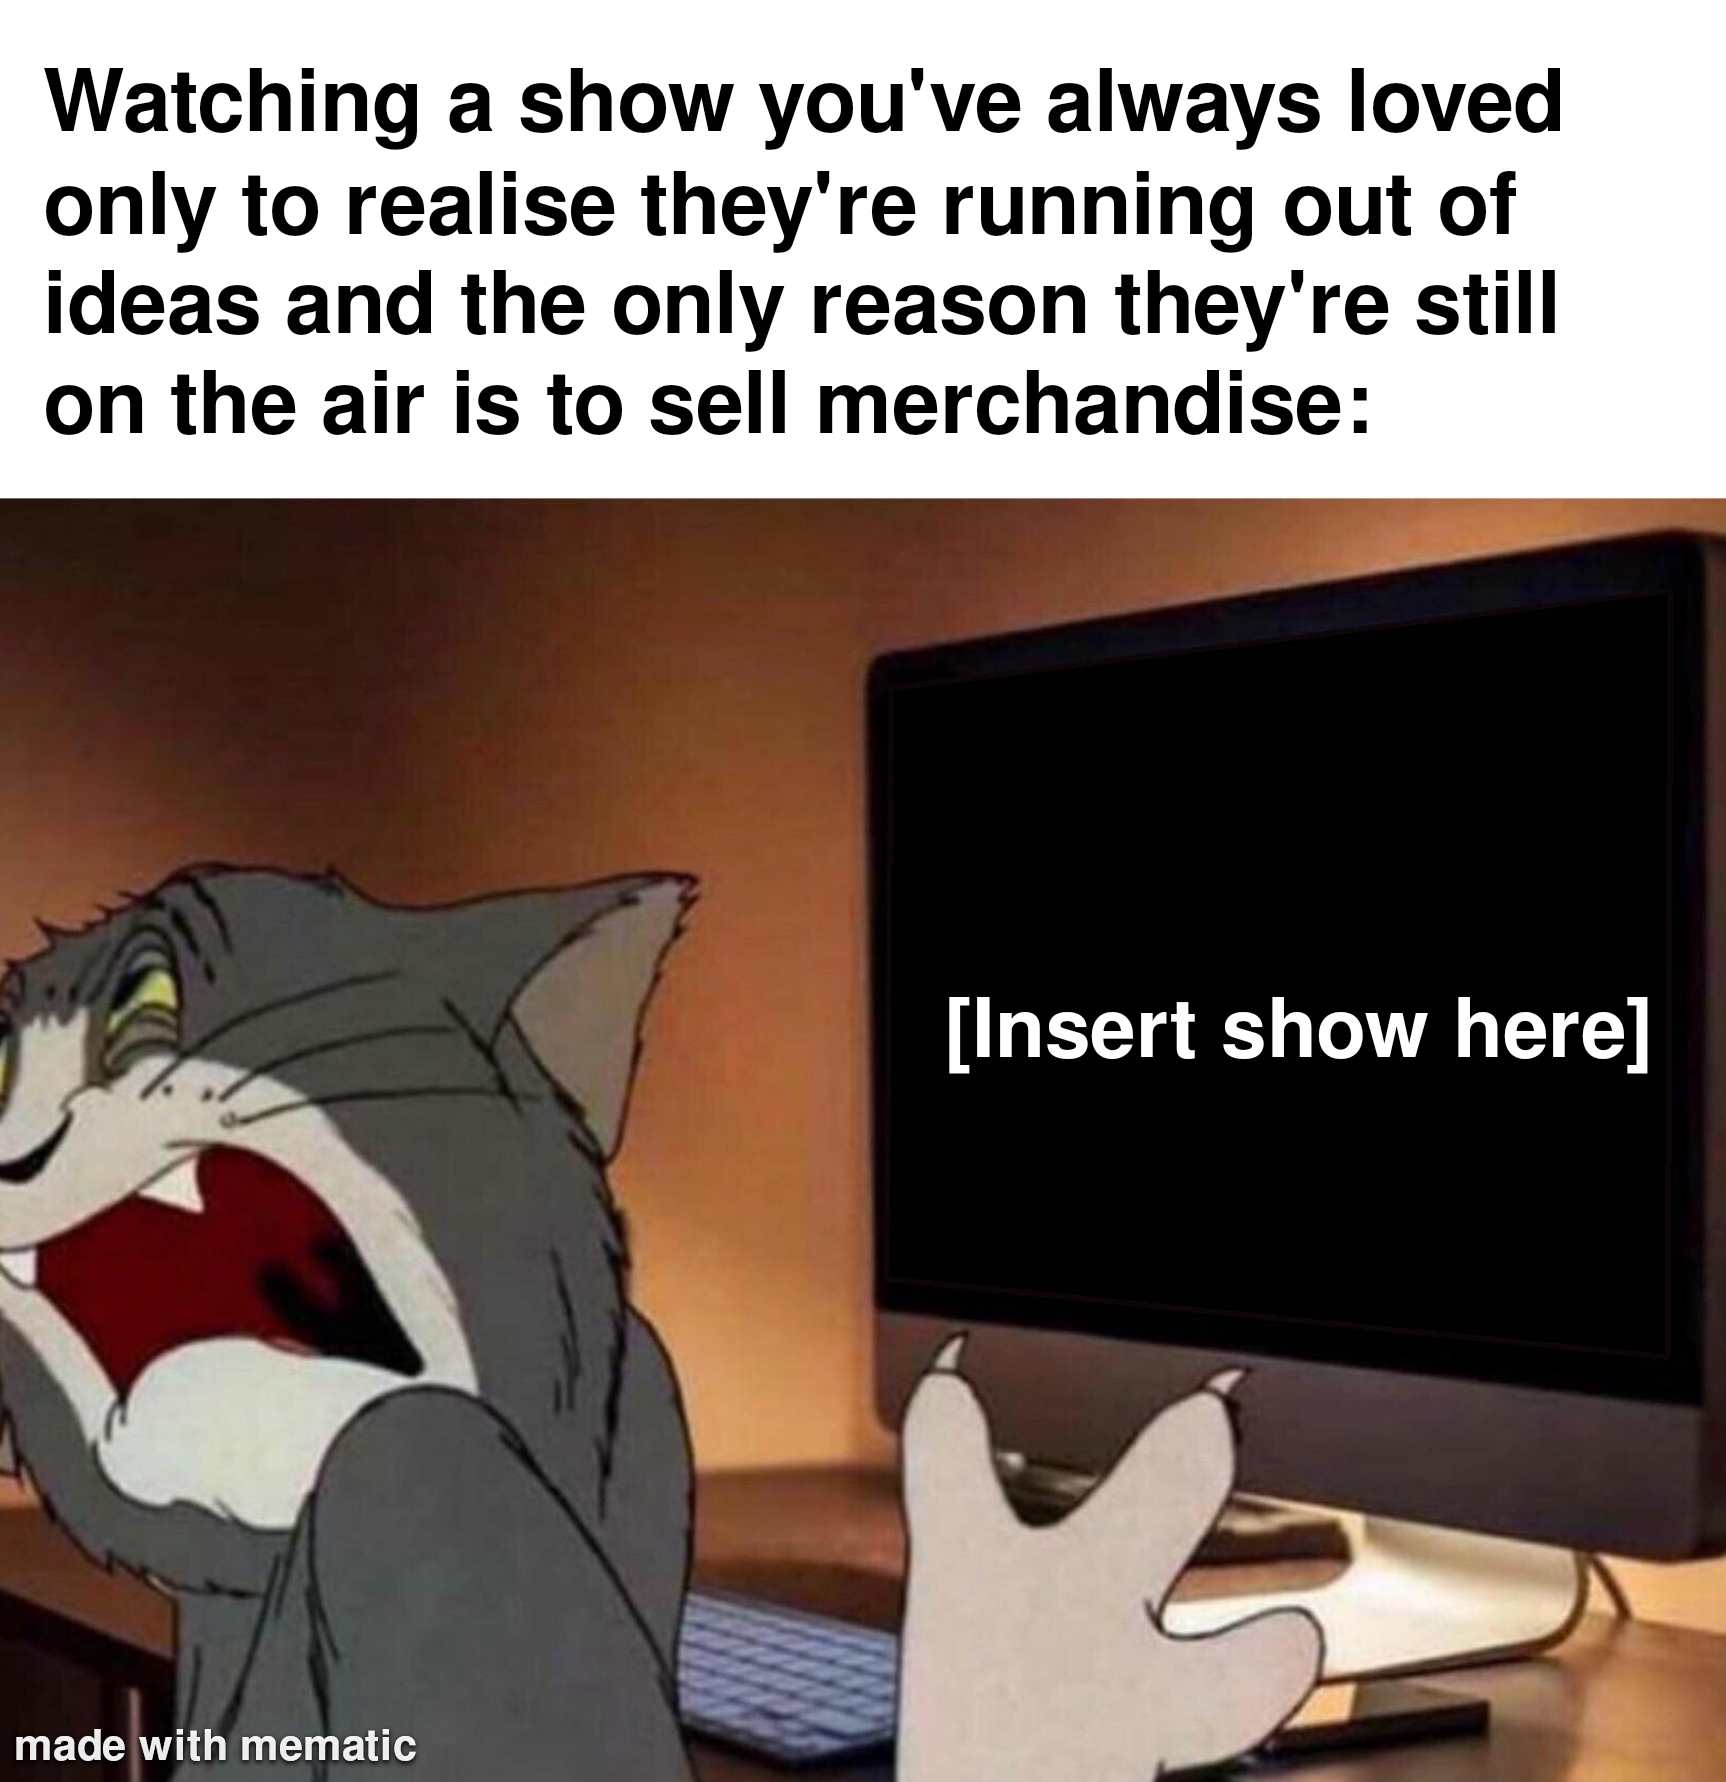 funny memes and pics - cartoon - Watching a show you've always loved only to realise they're running out of ideas and the only reason they're still on the air is to sell merchandise made with mematic Insert show here